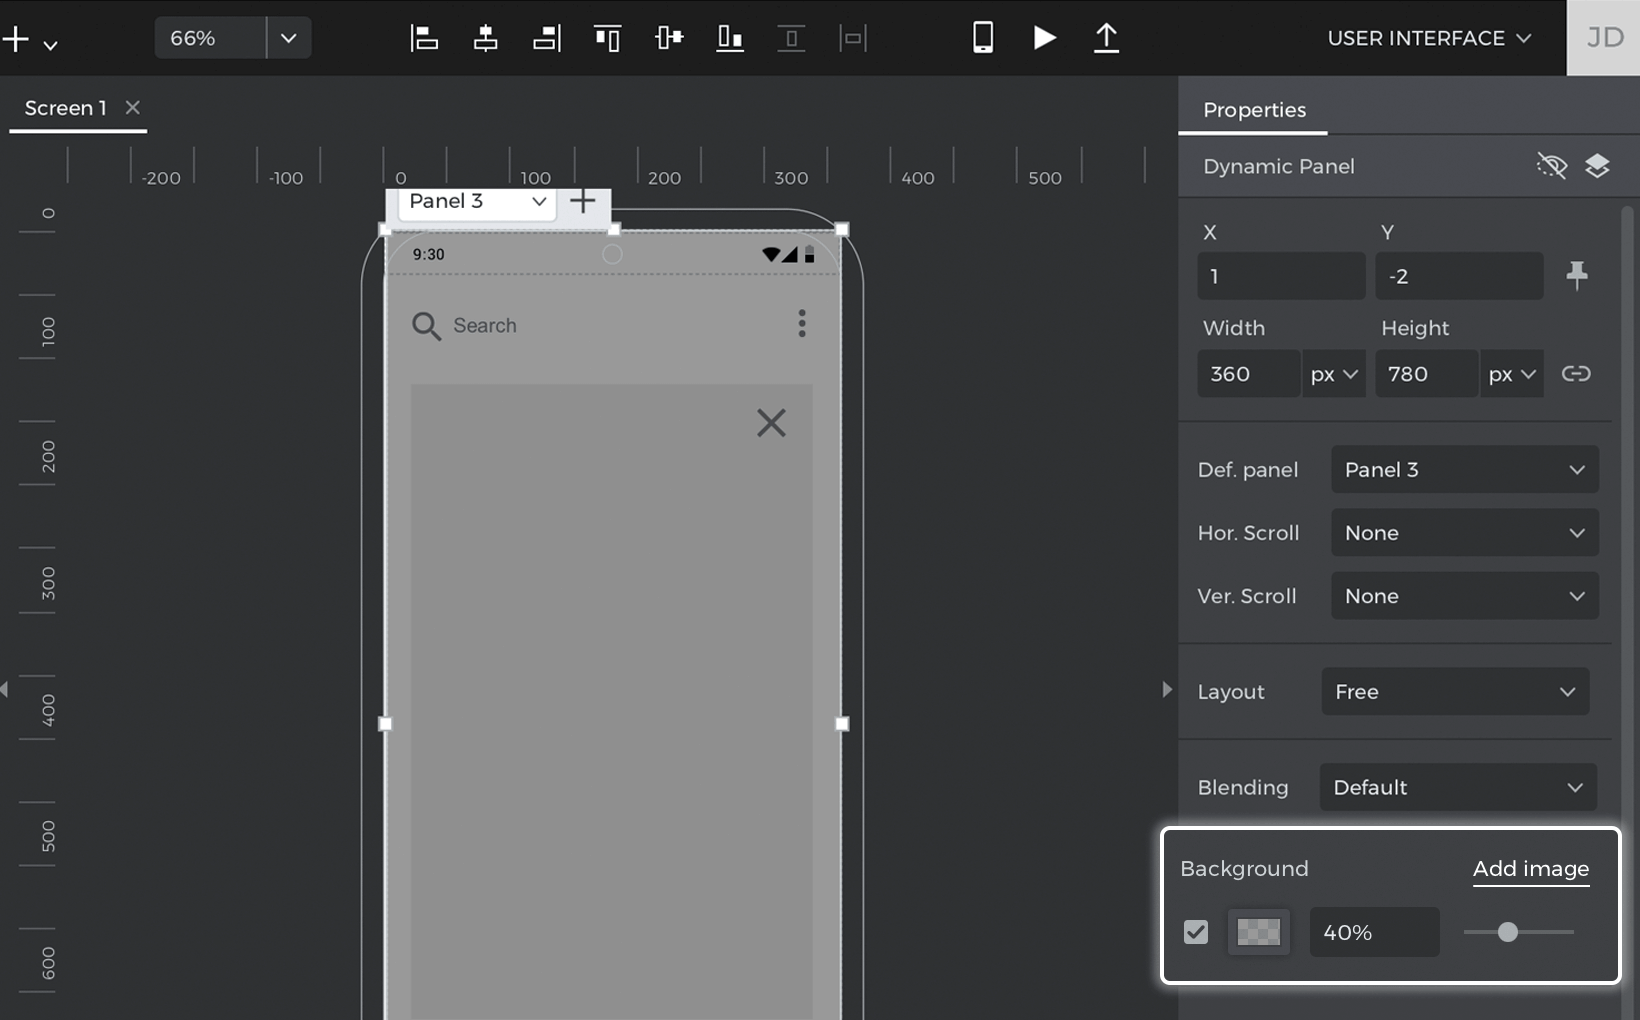 Change the dynamic panel to a dark background with 40 percent opacity